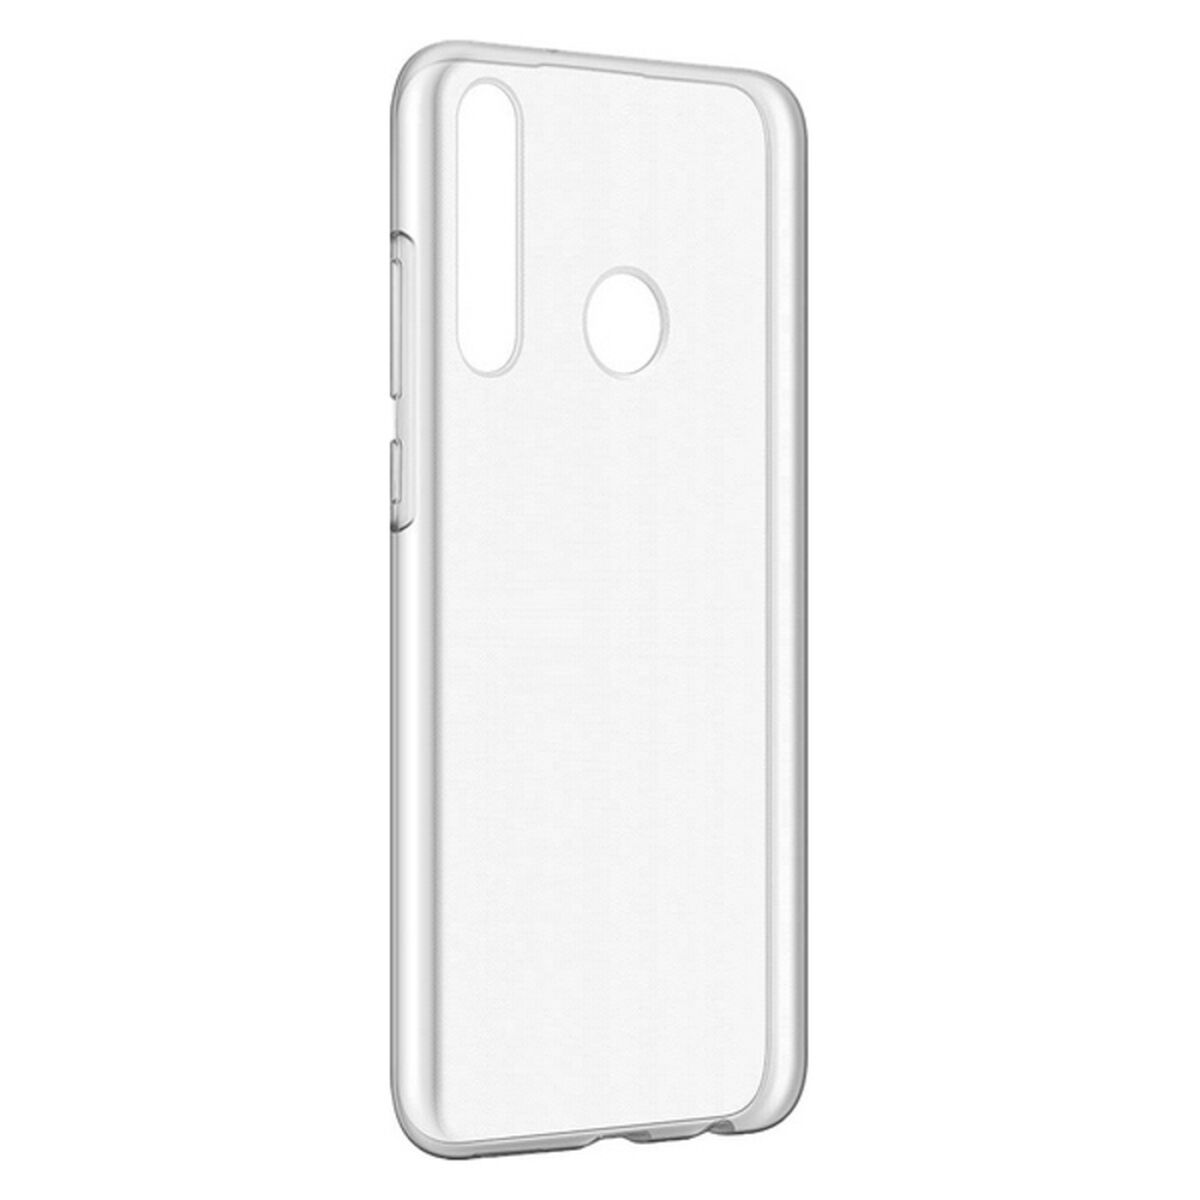 Mobile cover Huawei Y6P Transparent Polycarbonate, Huawei, Electronics, Mobile communication and accessories, mobile-cover-huawei-y6p-transparent-polycarbonate, Brand_Huawei, category-reference-2609, category-reference-2642, category-reference-2847, category-reference-t-19653, category-reference-t-21312, category-reference-t-4036, category-reference-t-4037, computers / peripherals, Condition_NEW, entertainment, music, office, Price_20 - 50, telephones & tablets, Teleworking, RiotNook